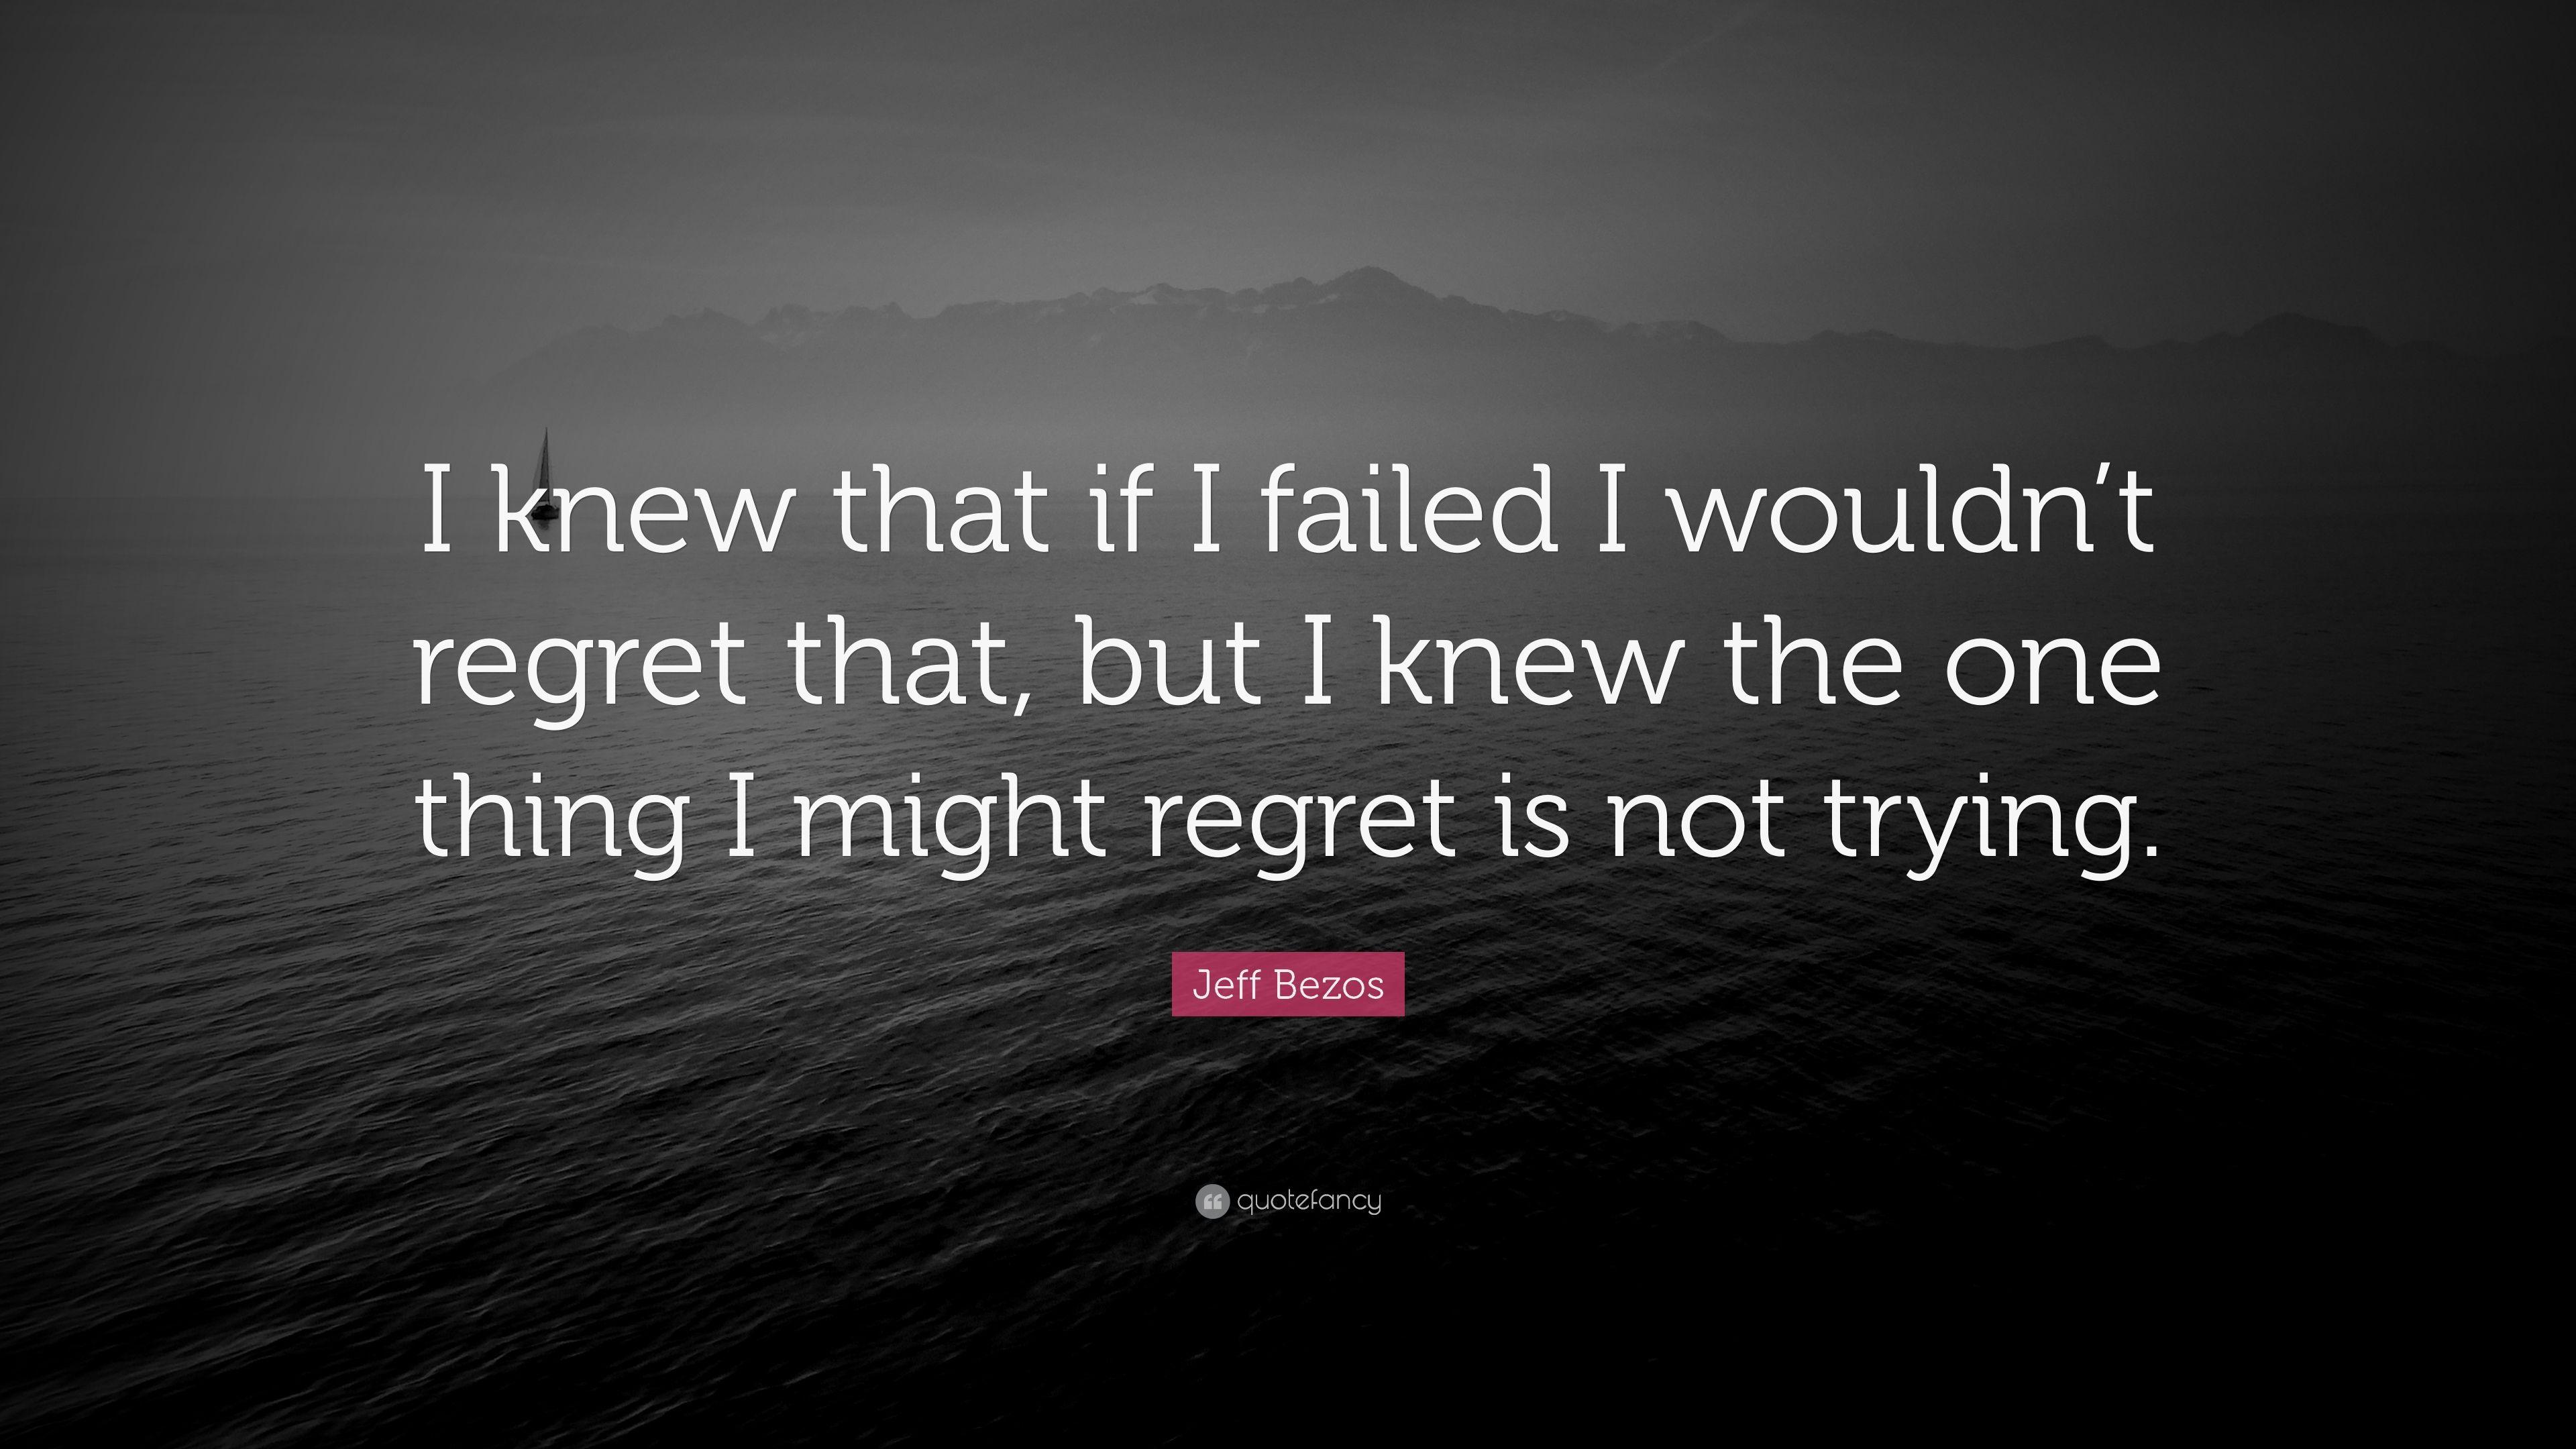 Jeff Bezos Quote: “I knew that if I failed I wouldn't regret that